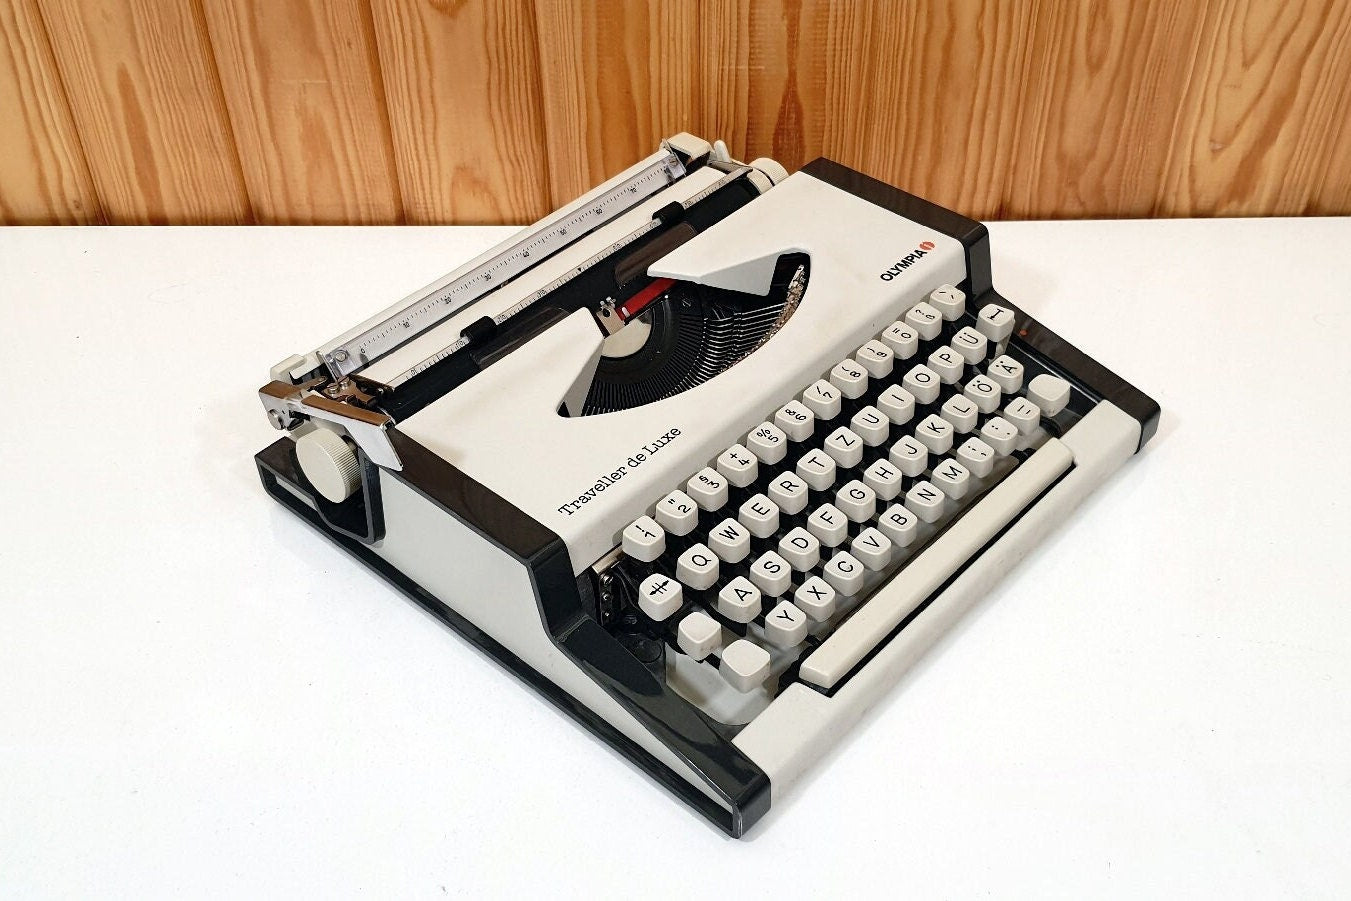 Olympia Deluxe Typewriter - Like Never Used, Very Clean, Typewriter Like New, Fully Operational